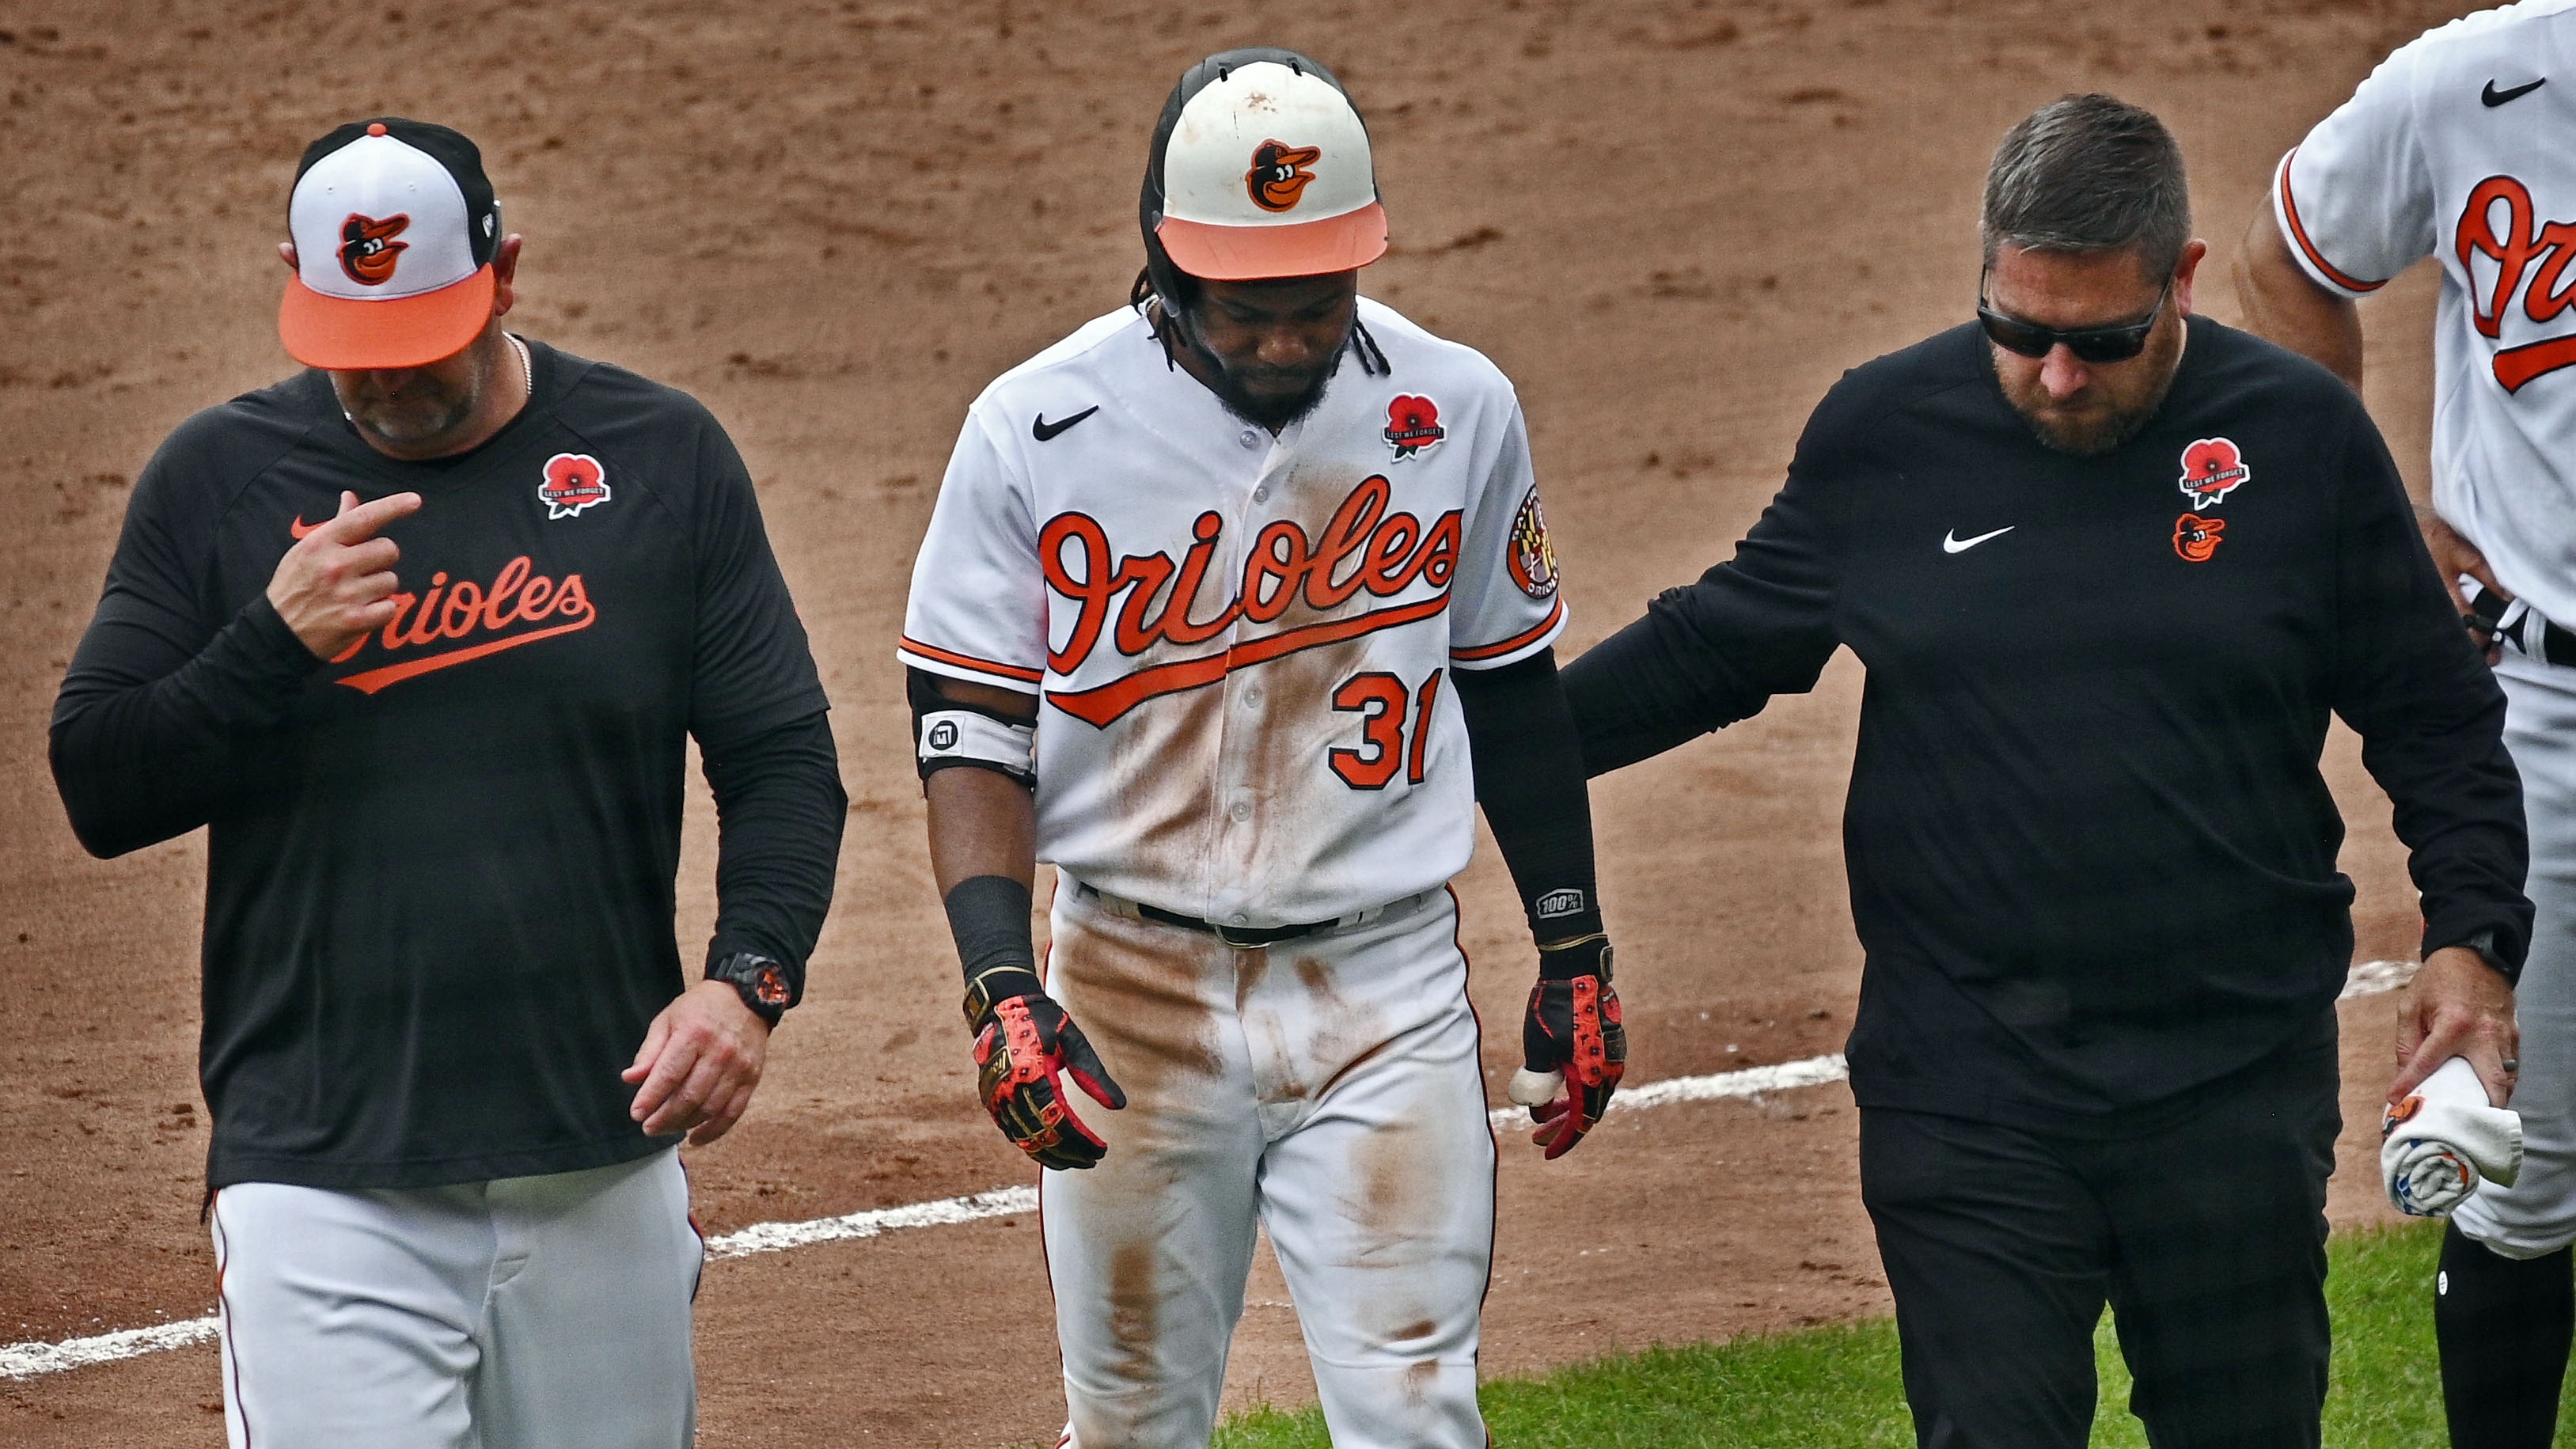 Orioles star center fielder goes down with injury